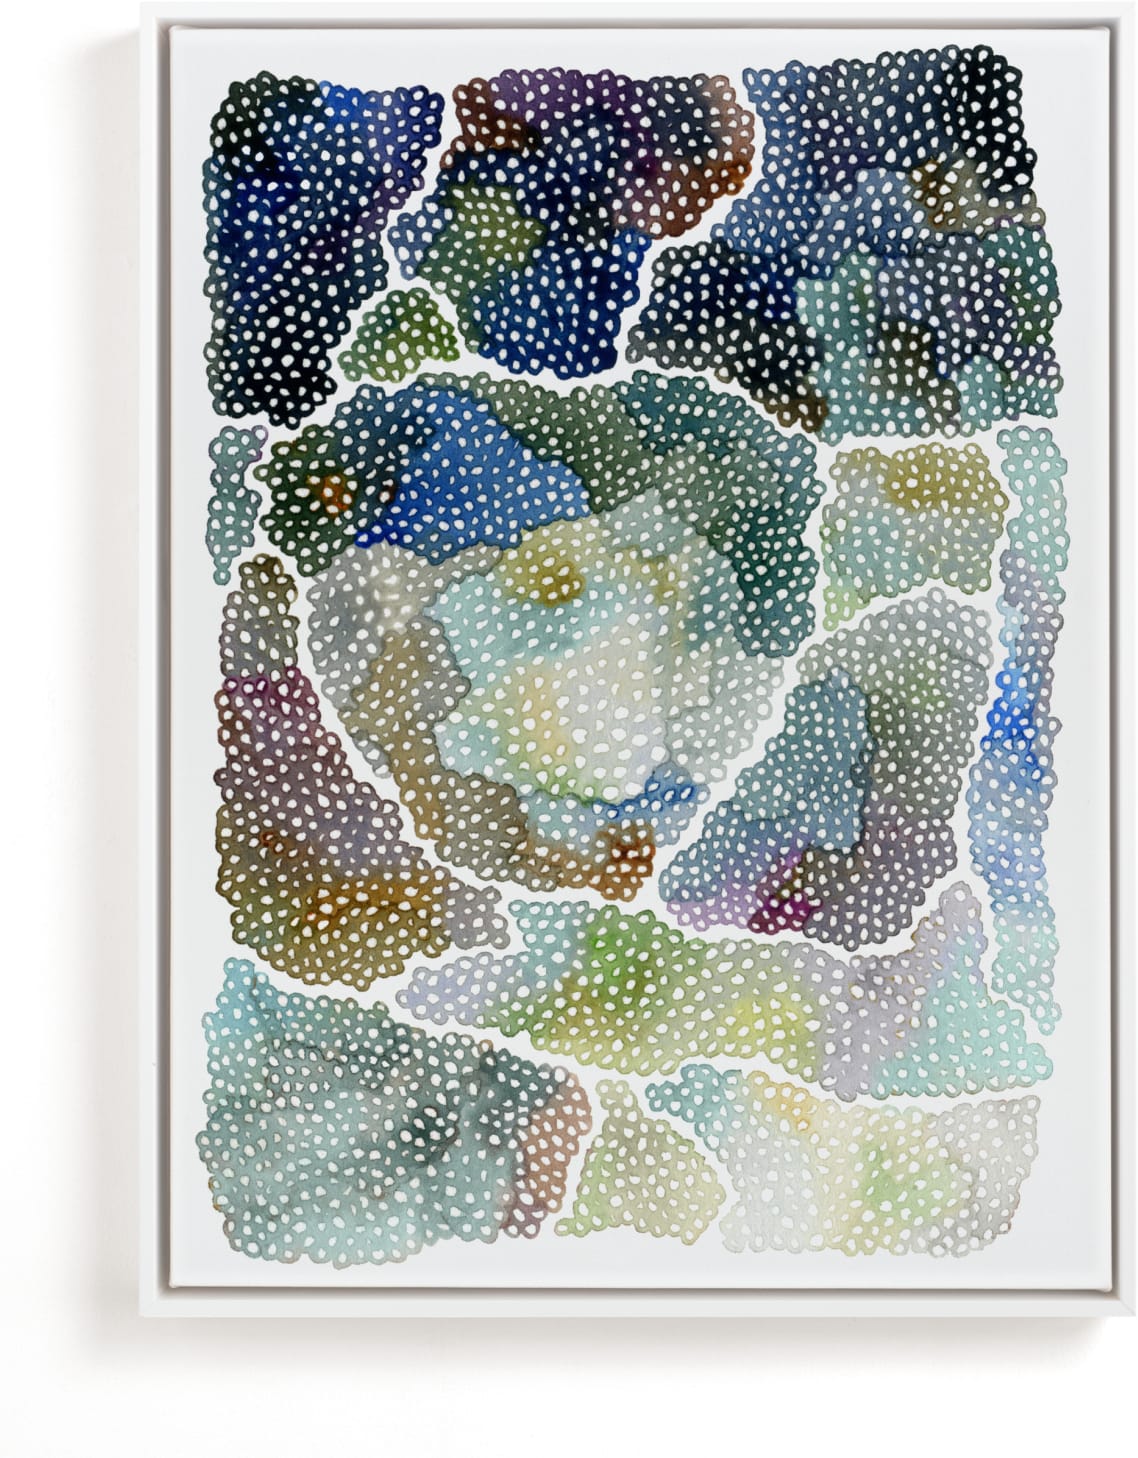 This is a blue art by Kelly Place called freckle topography II.